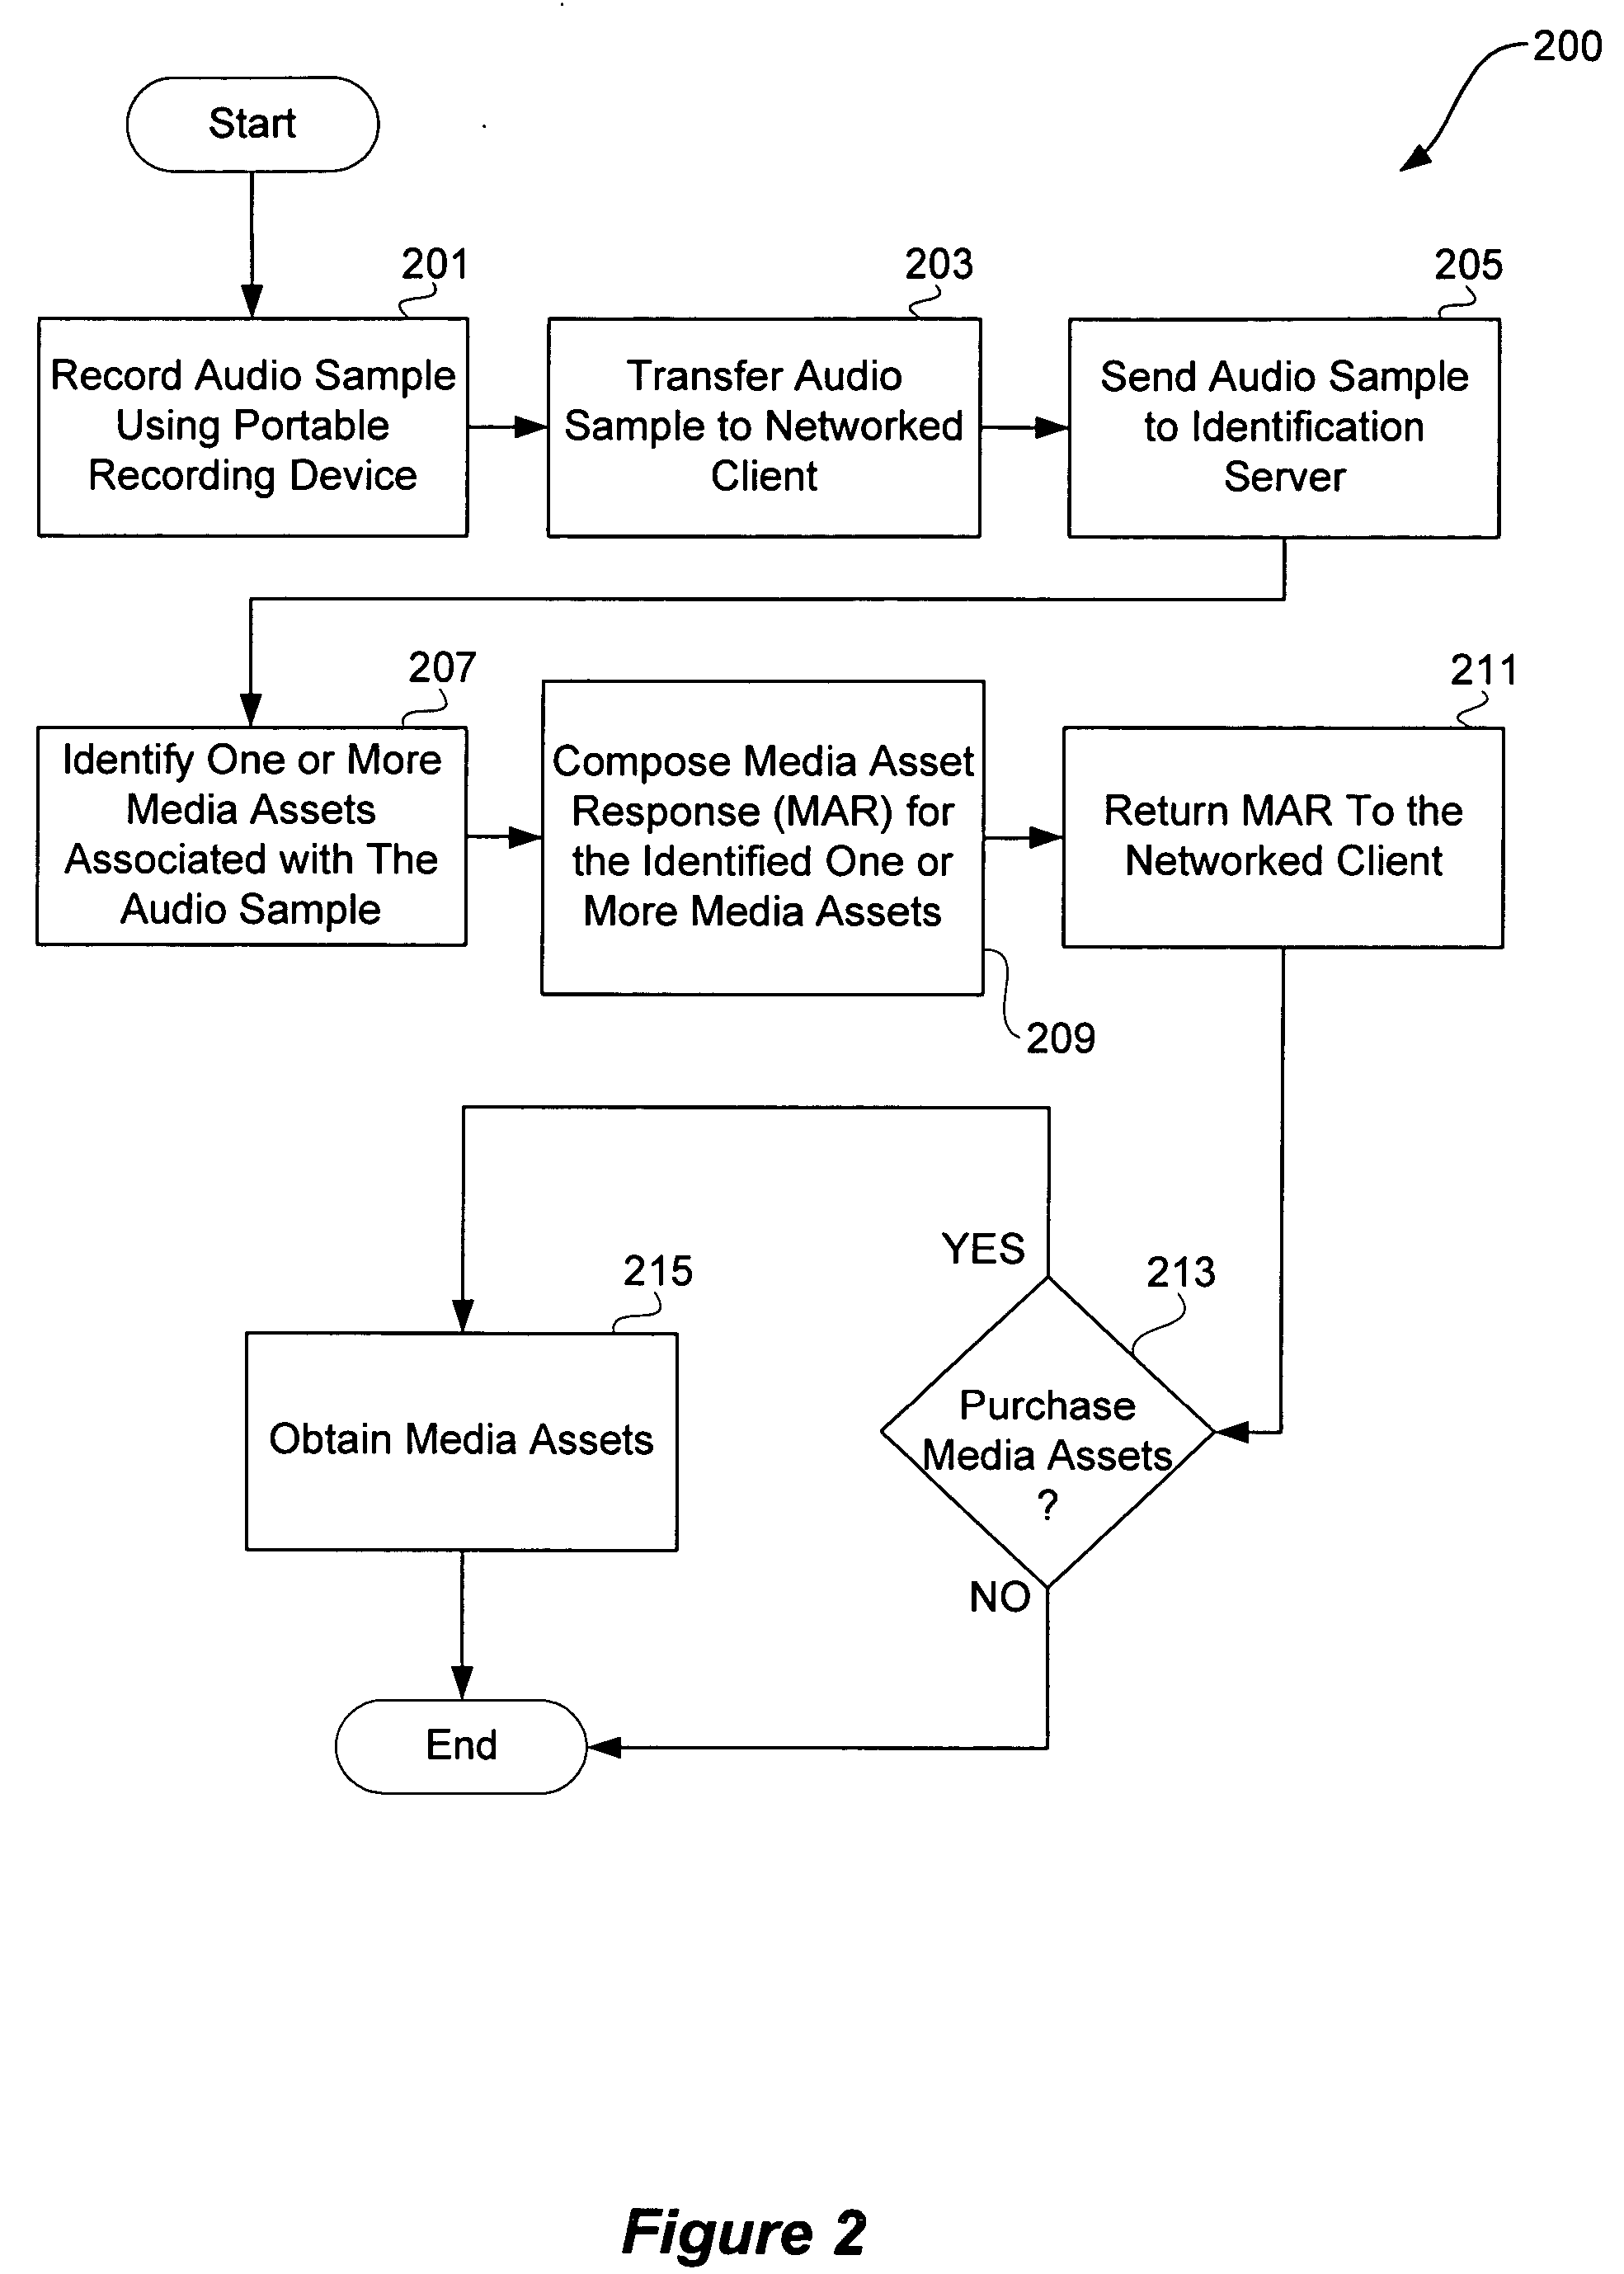 Audio sampling and acquisition system